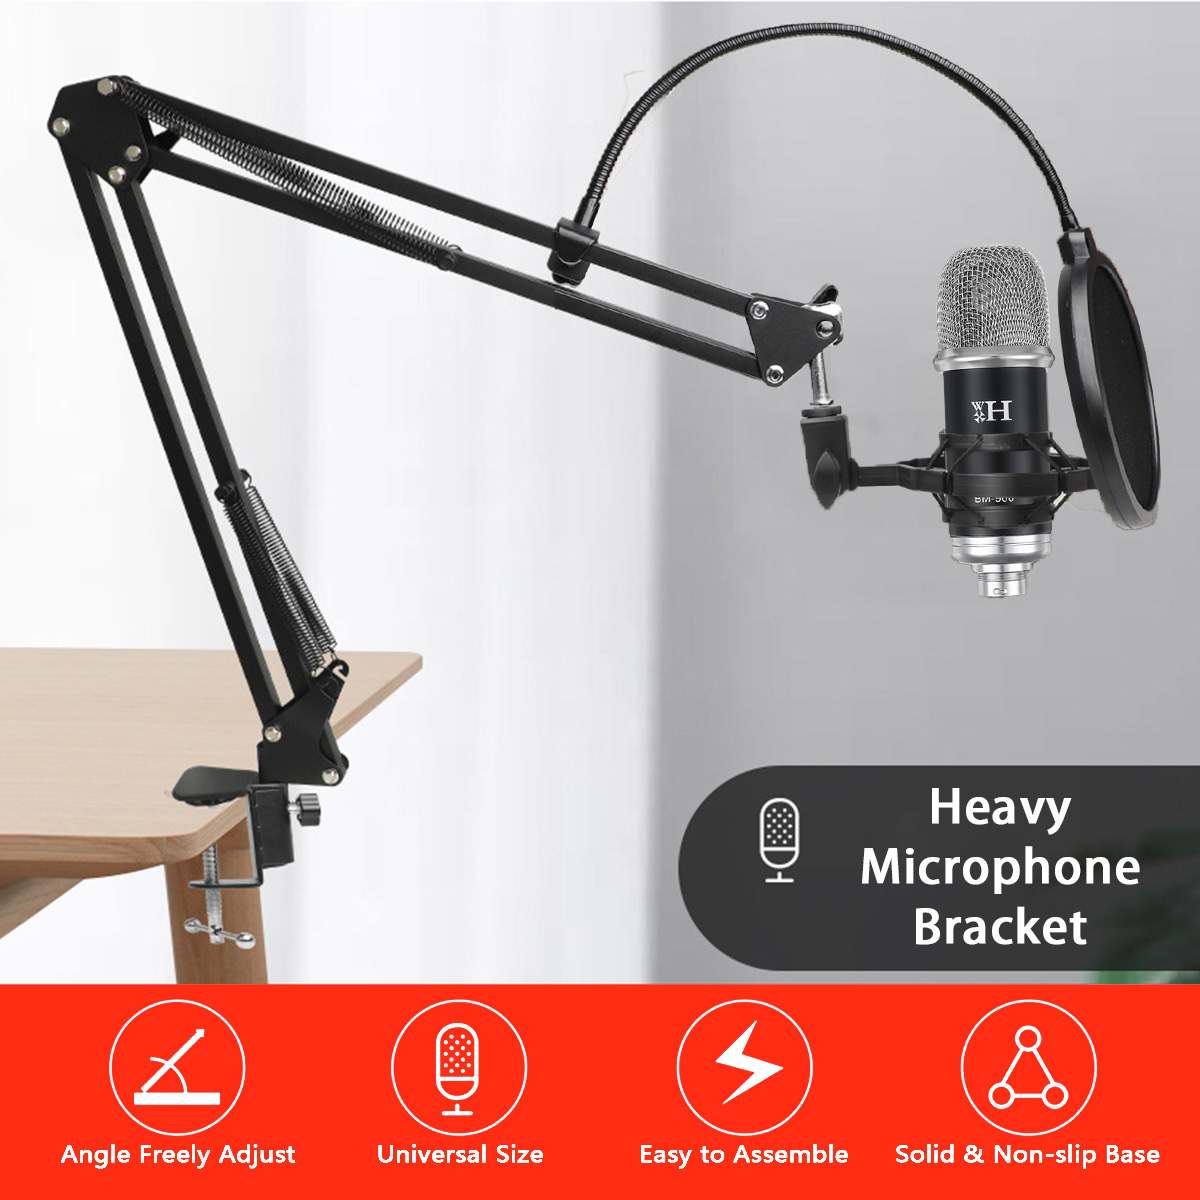 BM-900-Live-Sound-Card-Condenser-Microphone-Set-Recording-Mount-Boom-Stand-Mic-Kit-for-Live-Broadcas-1941464-1